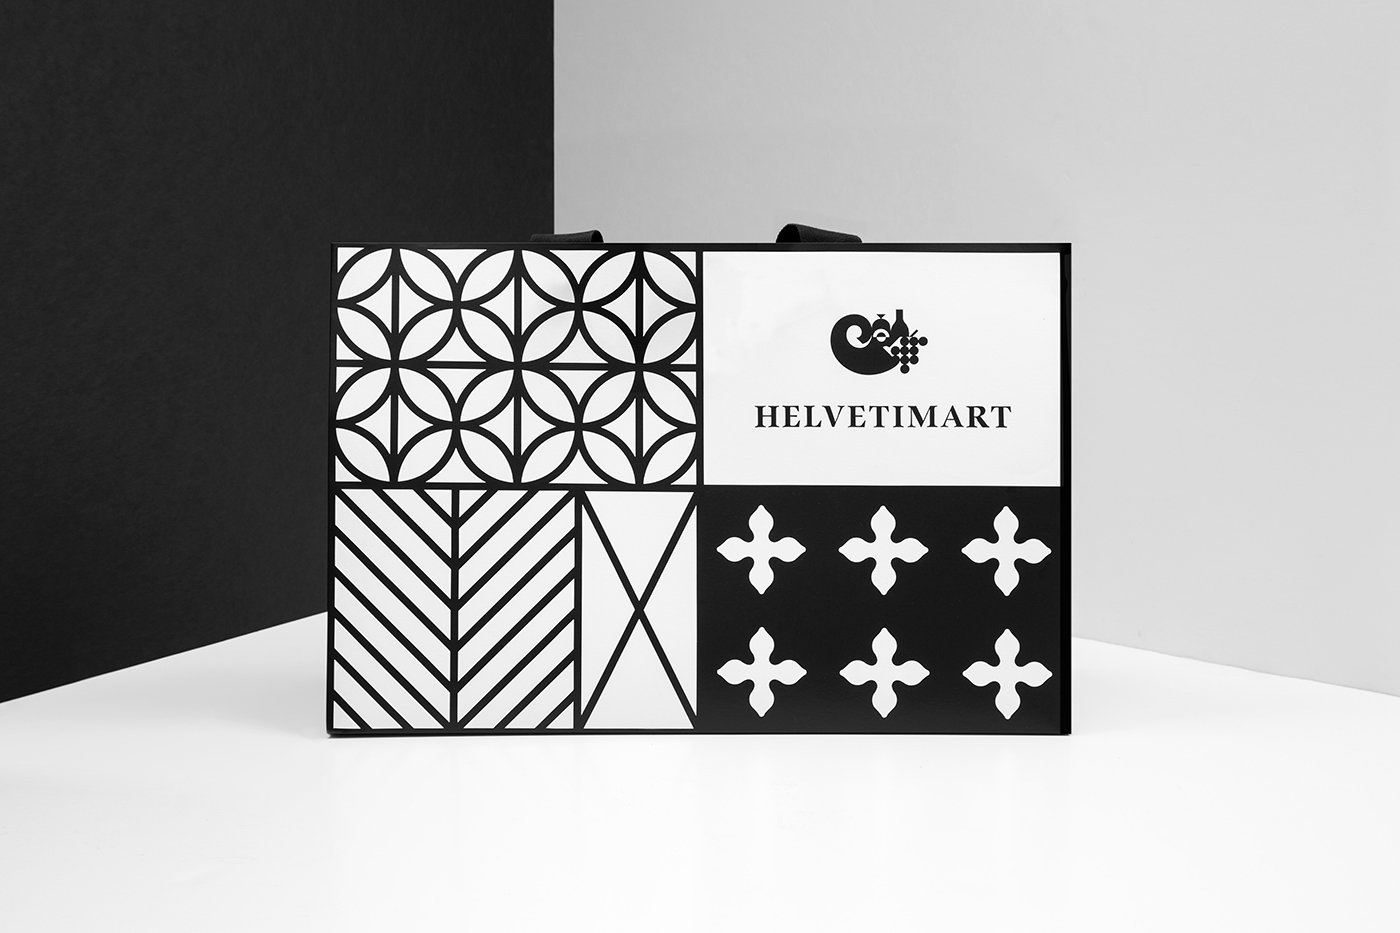 Brand identity, logo and shopping bag by Anagrama for Lausanne-based independent food and speciality supermarket Helvetimart